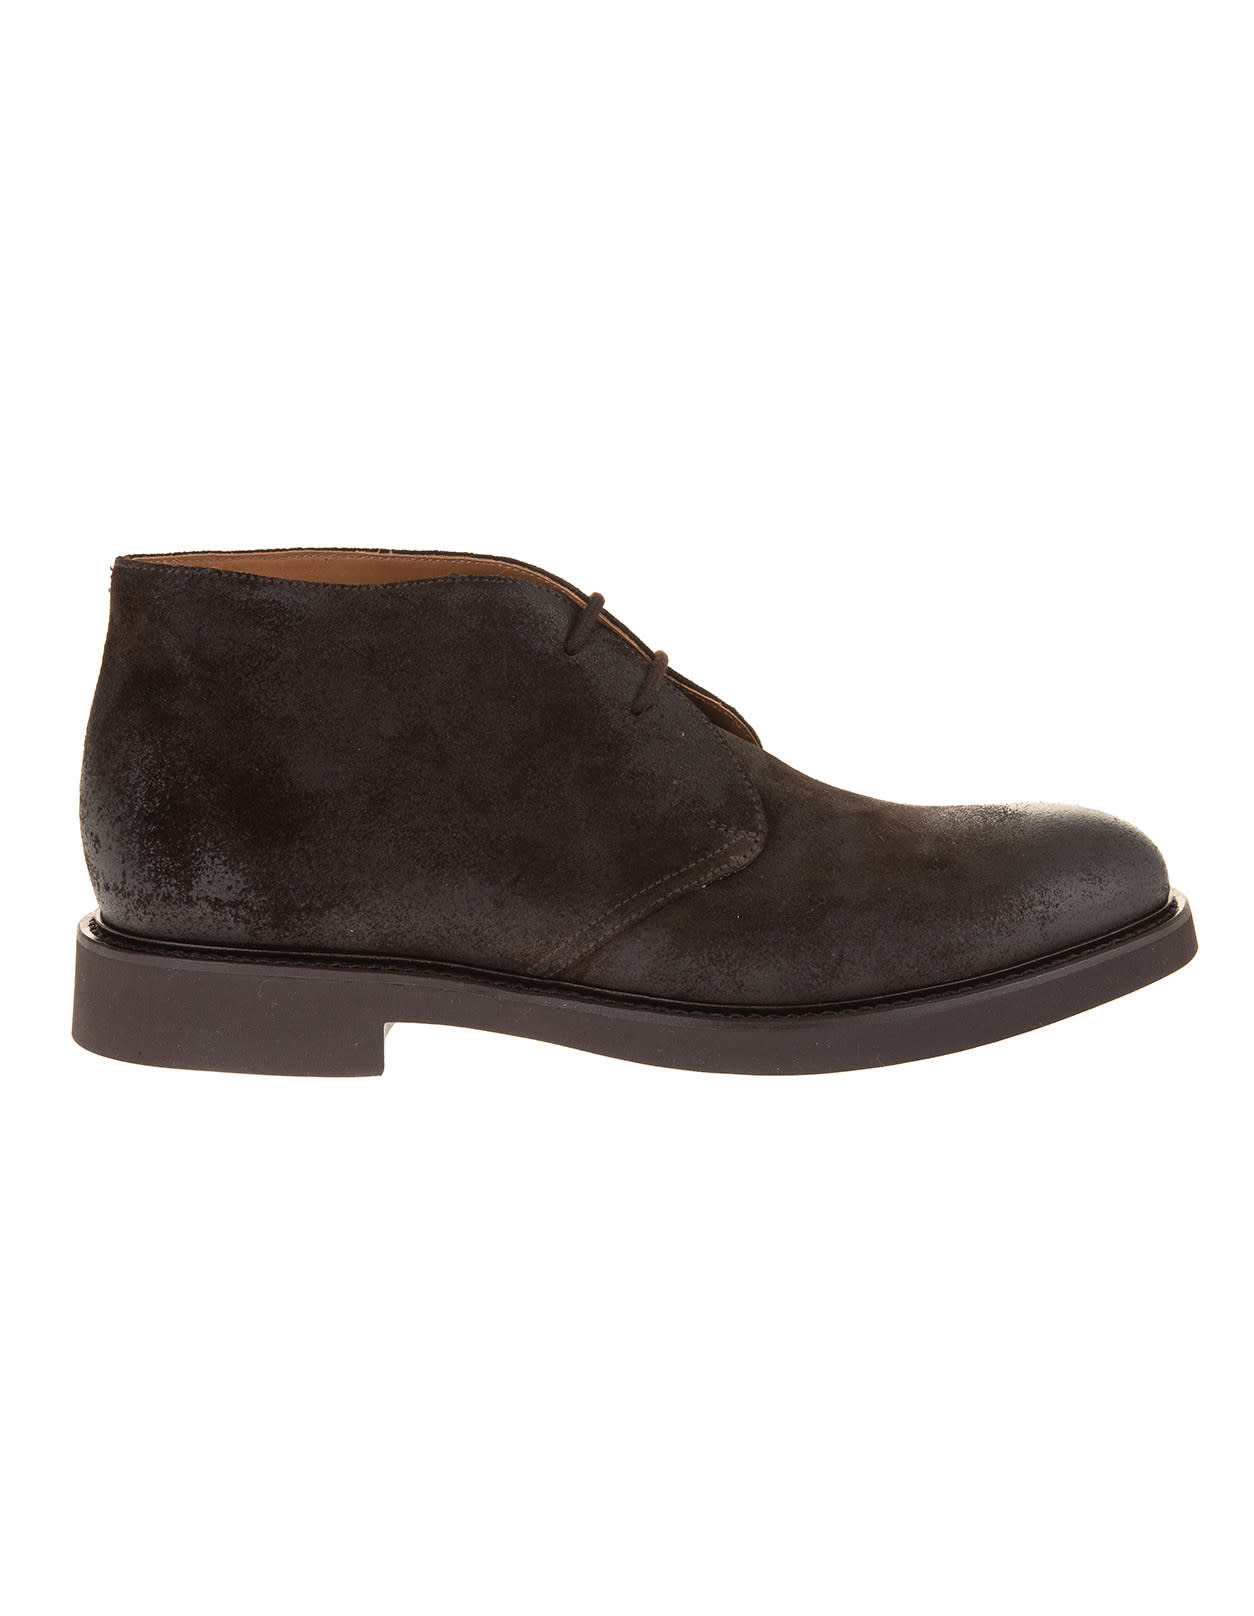 Doucals Man Dark Brown Lace-up Ankle Boot